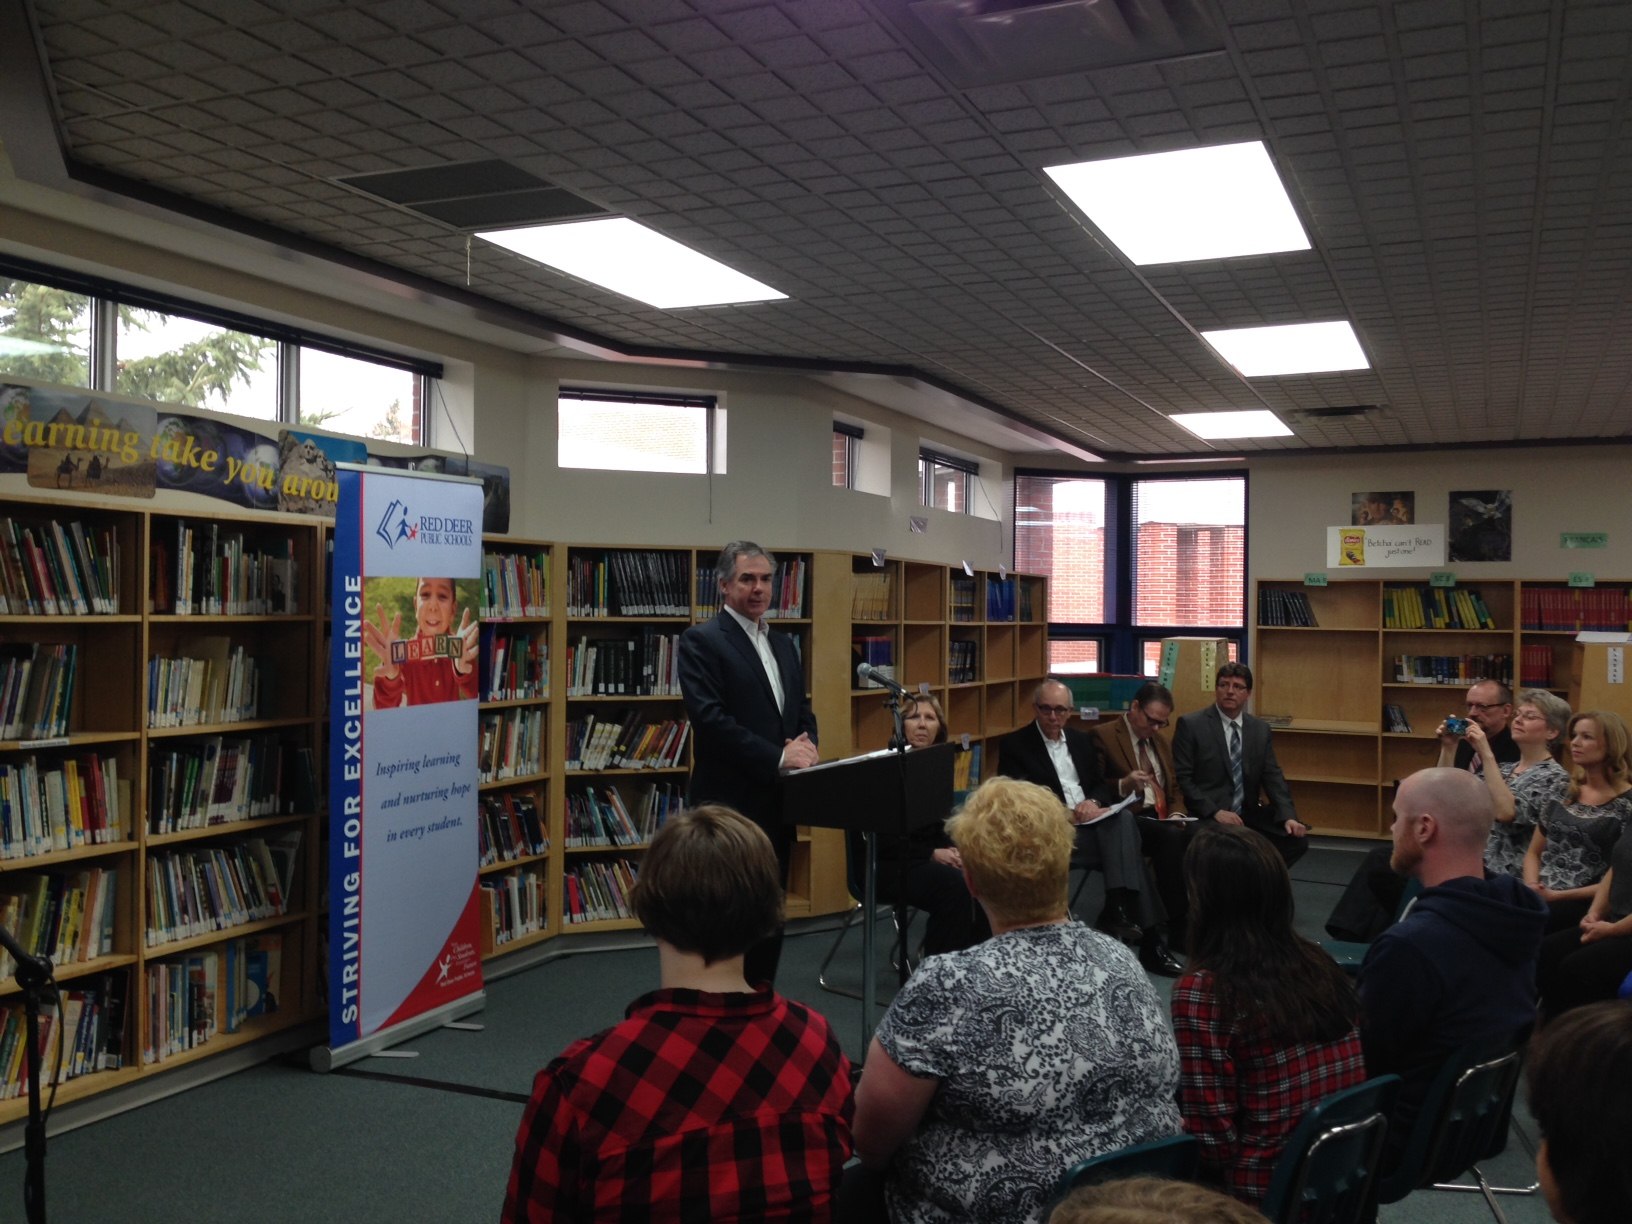 ANNOUNCEMENT – Premier Jim Prentice along with Health Minister Stephen Mandel announced funding for a local initiative